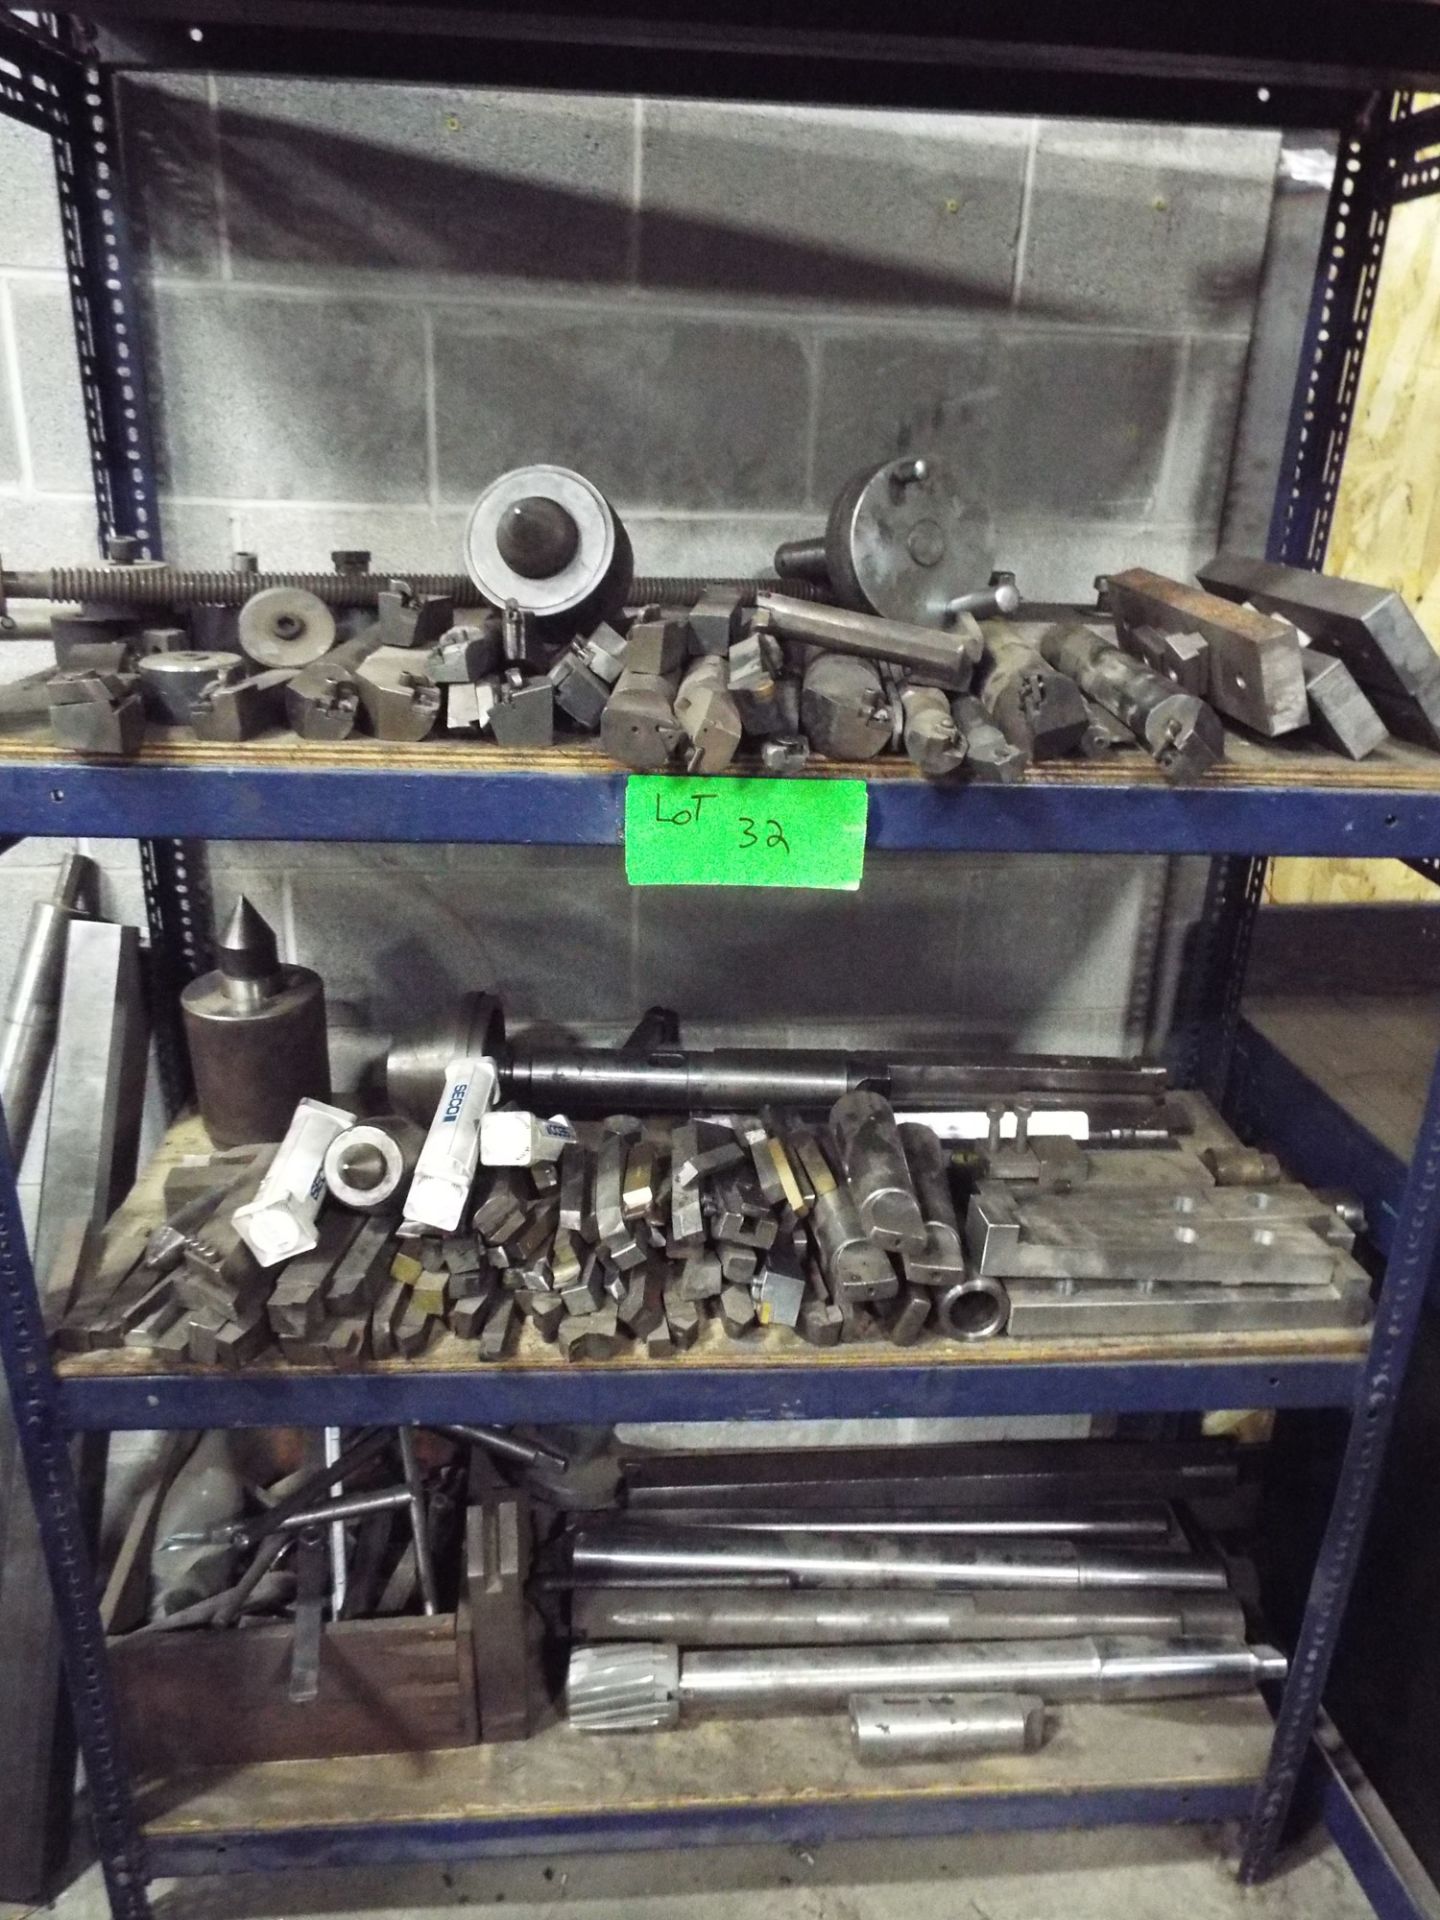 LOT/ SIRCO TOOLING INCLUDING BORING BARS, CENTERS AND REAMERS, S/N: N/A